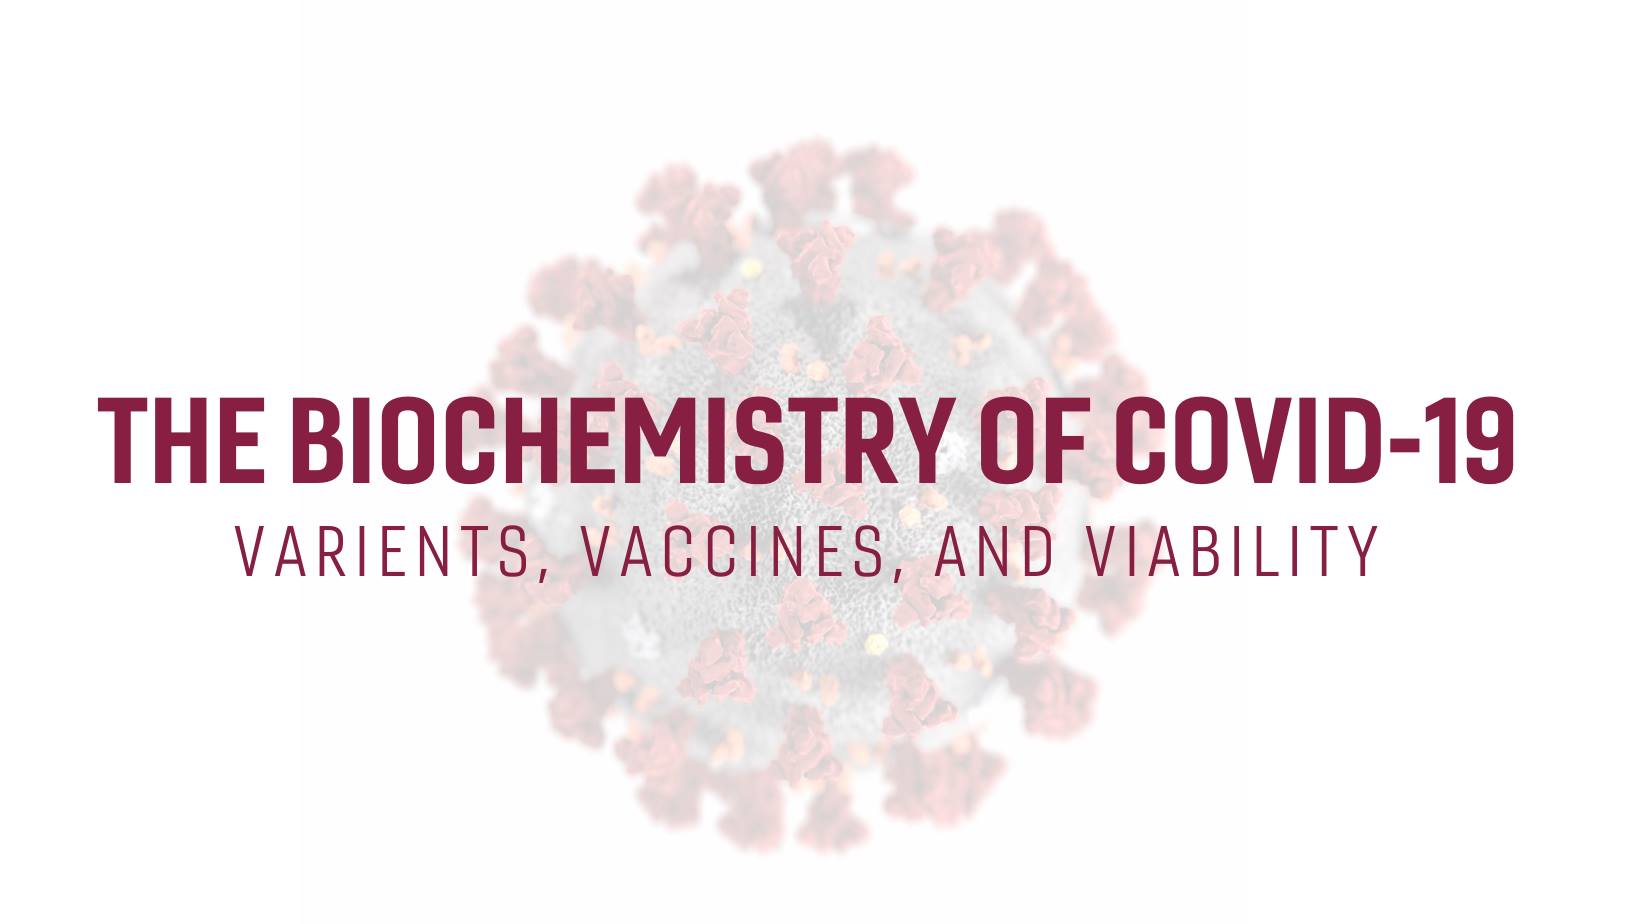 Biochemistry of COVID-19: Varients, Vaccines, and Viability